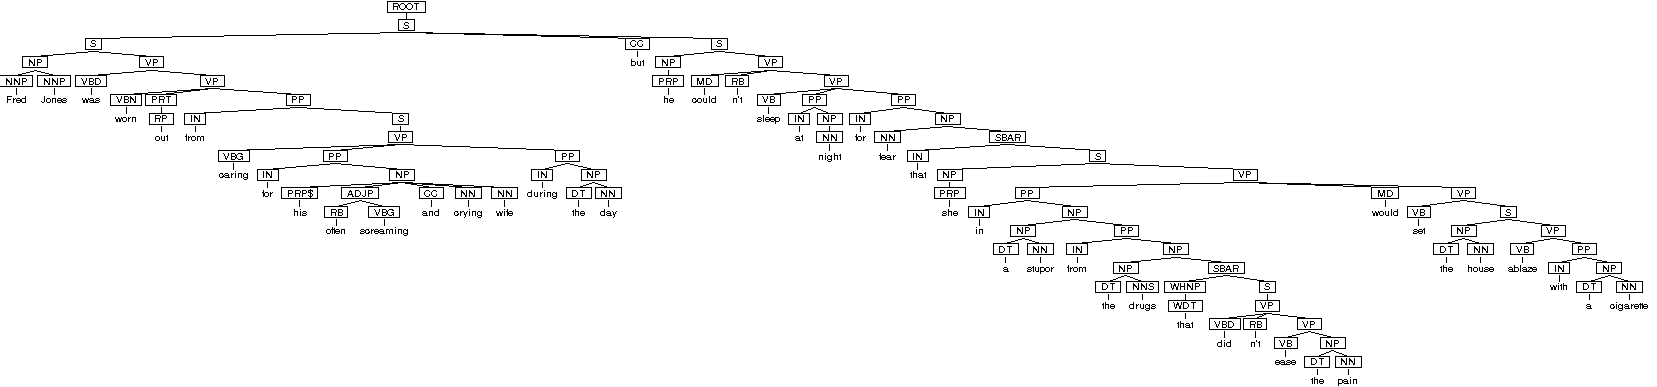 Parse tree for the entire lyrics to the song 'Cigarette' by Ben Folds